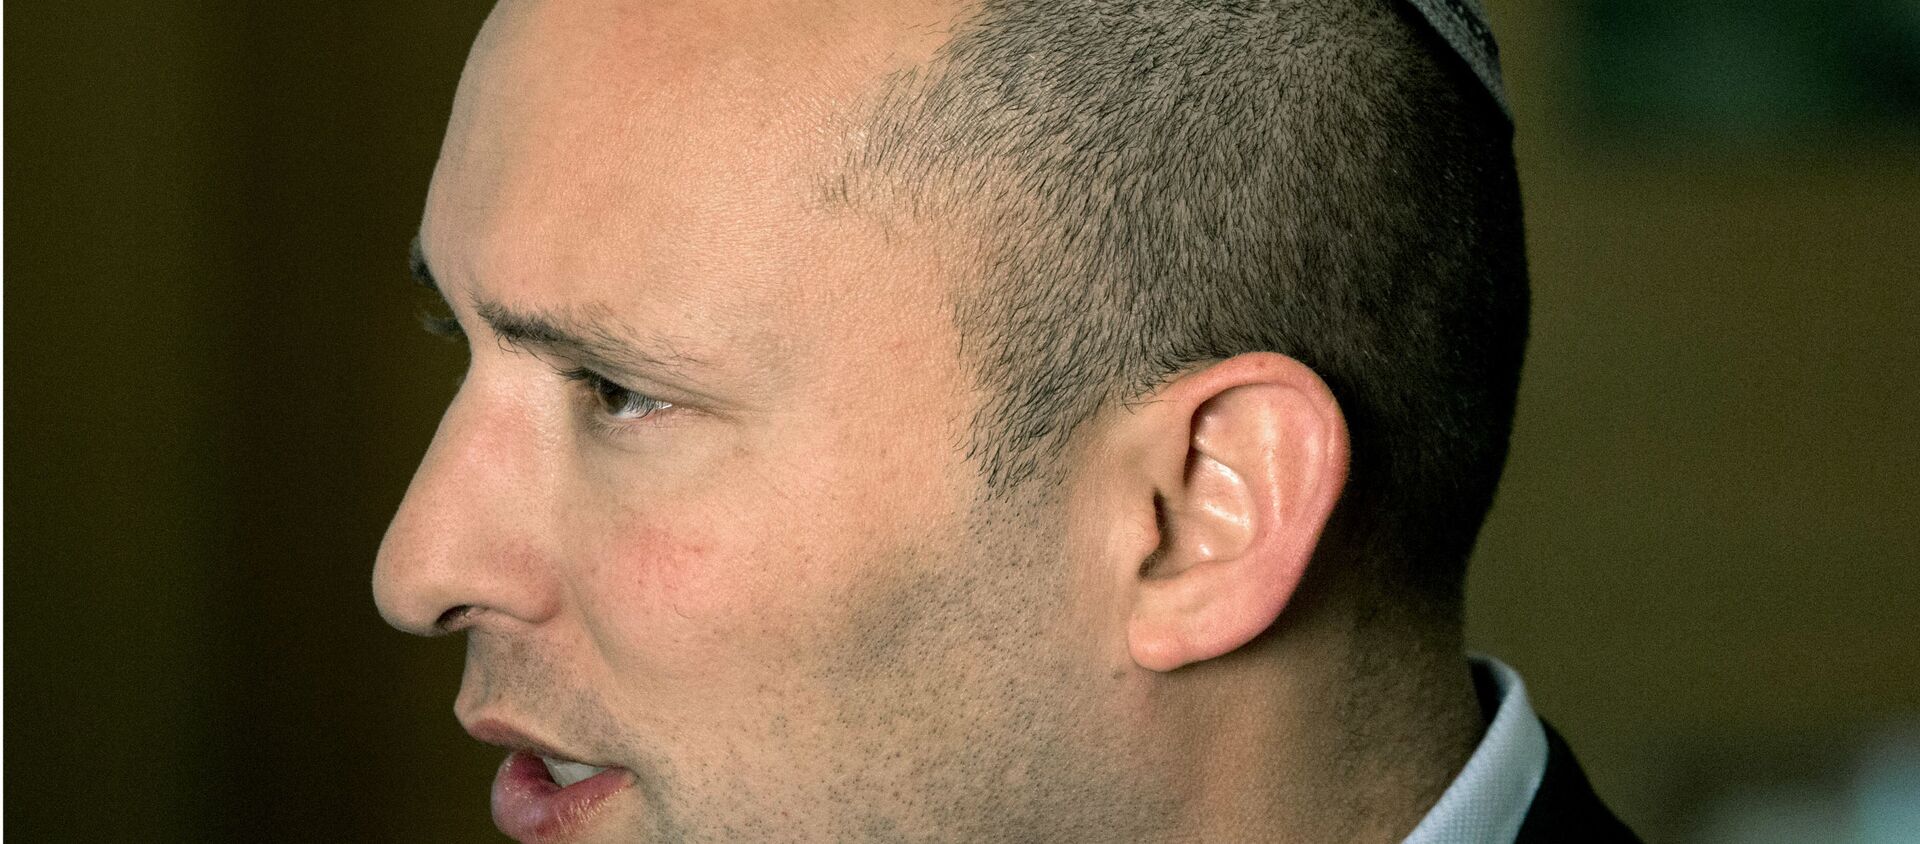  In this Monday, Feb. 16, 2015 file photo, Naftali Bennett, leader of the Jewish Home party, speaks during an interview to The Associated Press in Jerusalem. - Sputnik International, 1920, 25.08.2021